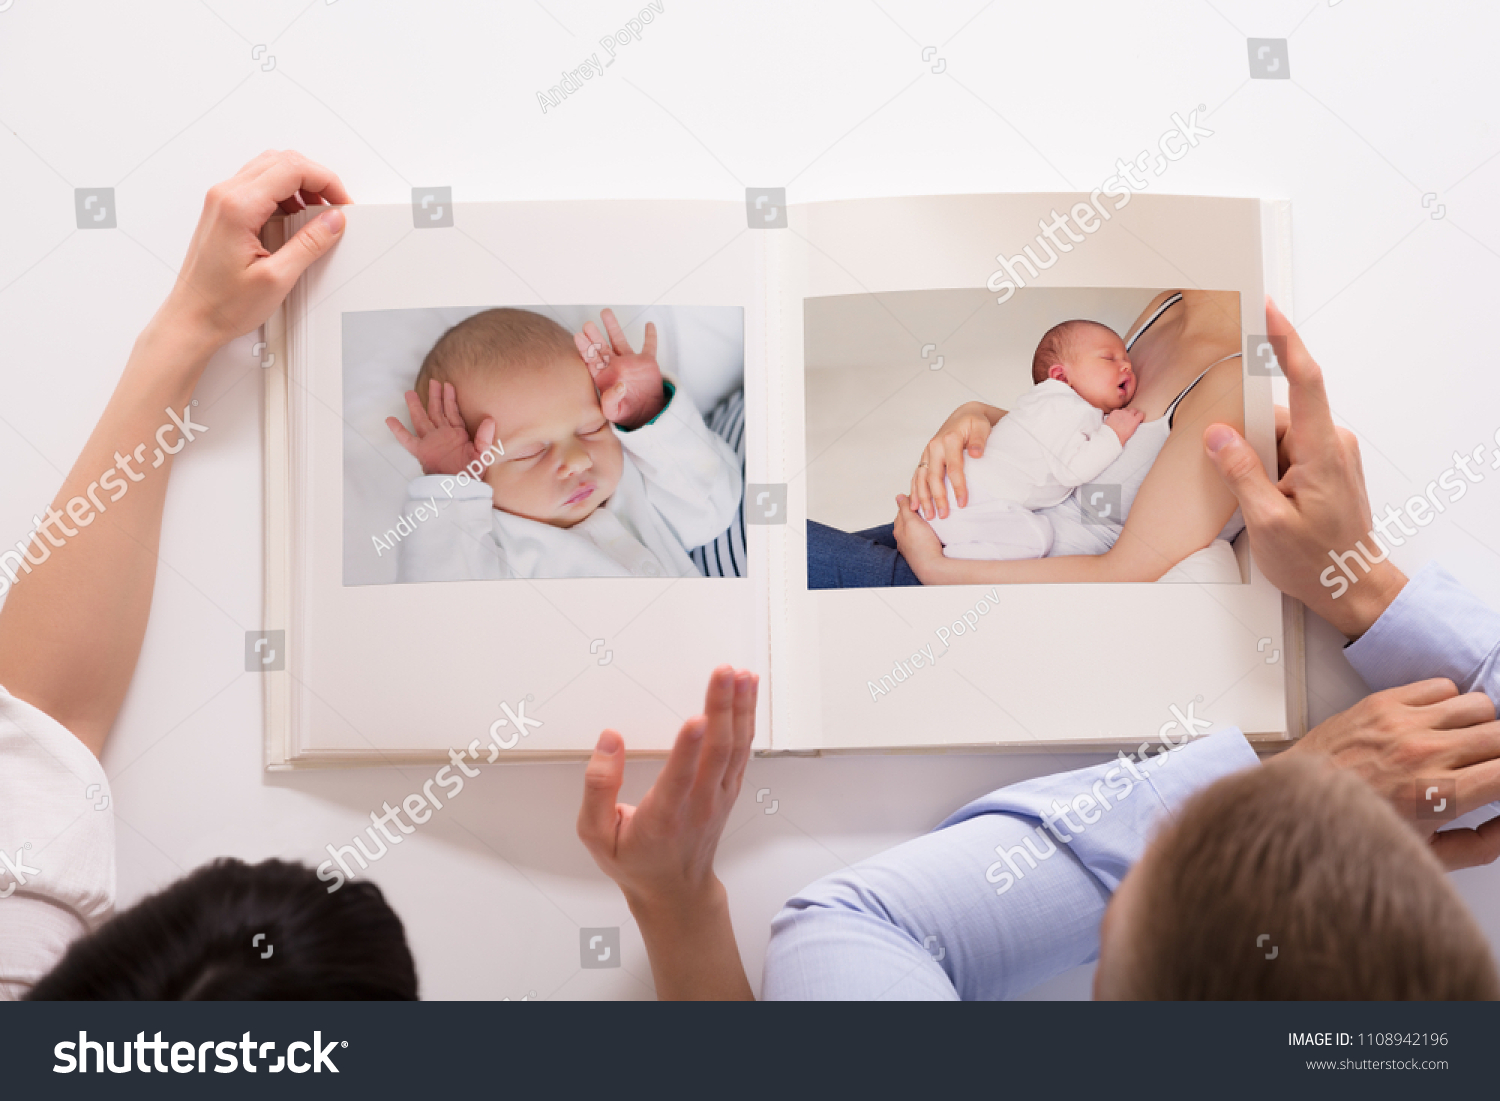 Elevated View Of Couple Looking At Baby's Photo Album On White Background #1108942196